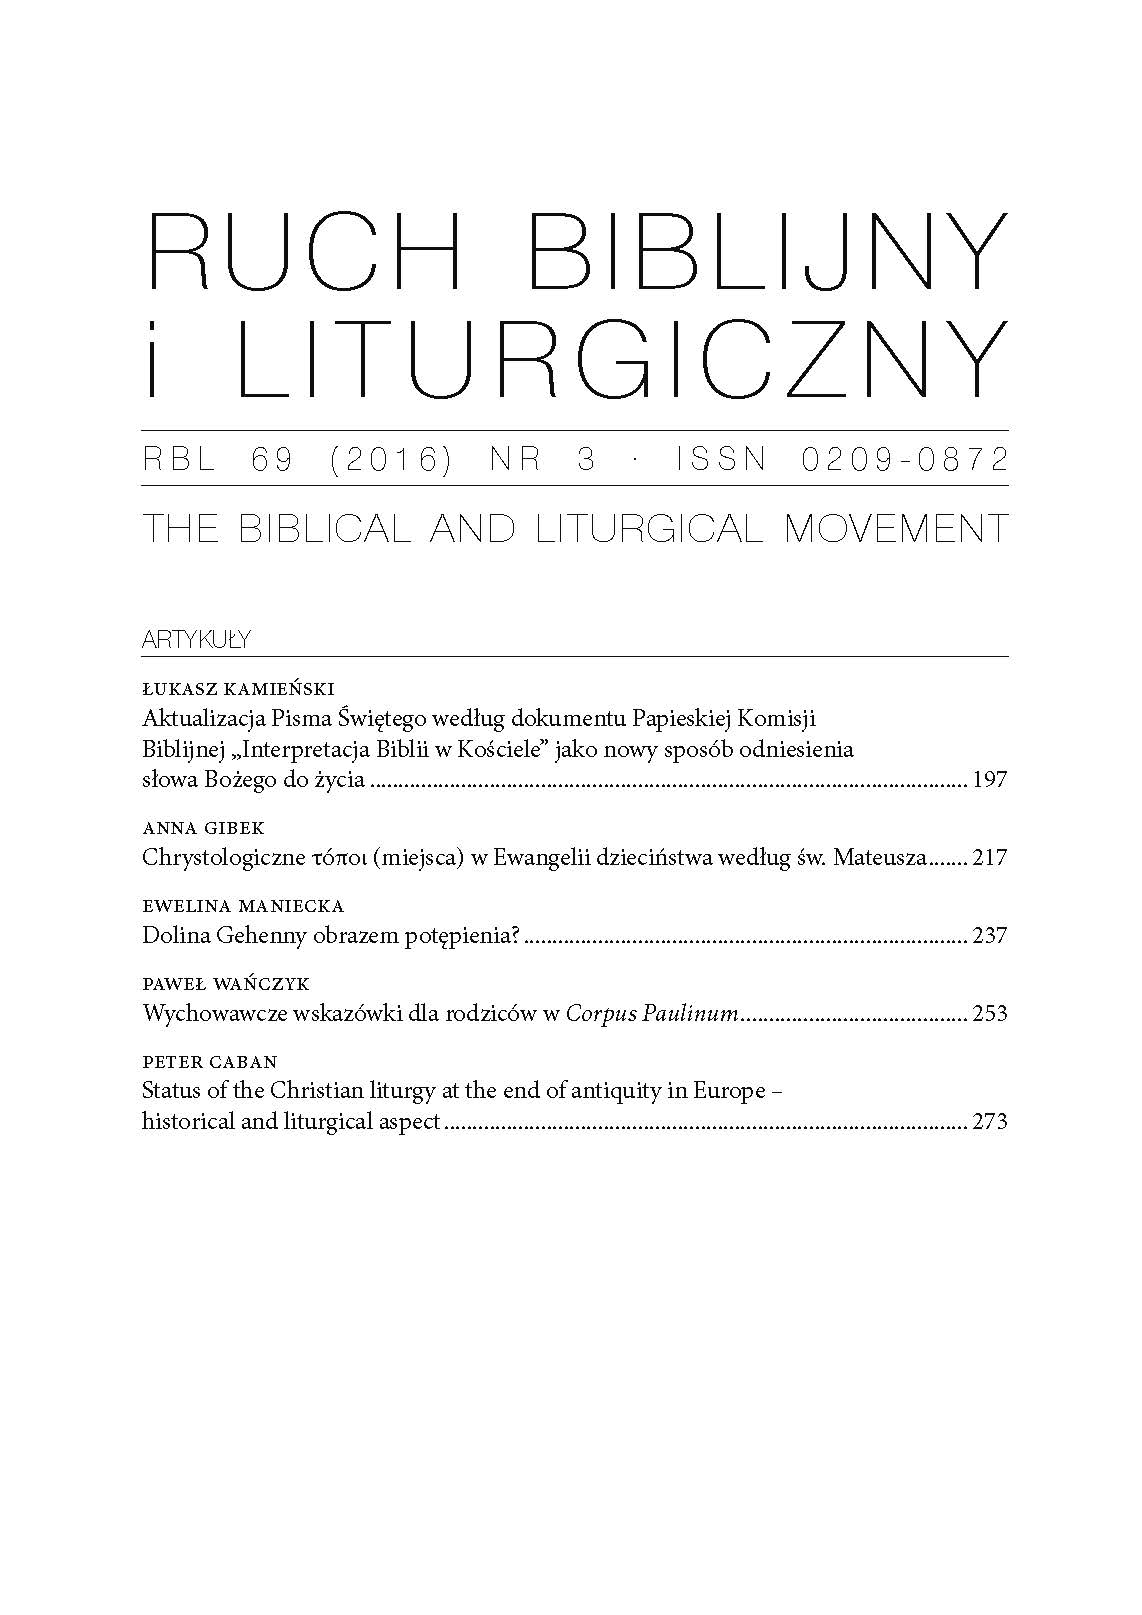 Status of the Christian liturgy at the end of antiquity in Europe – historical and liturgical aspect Cover Image